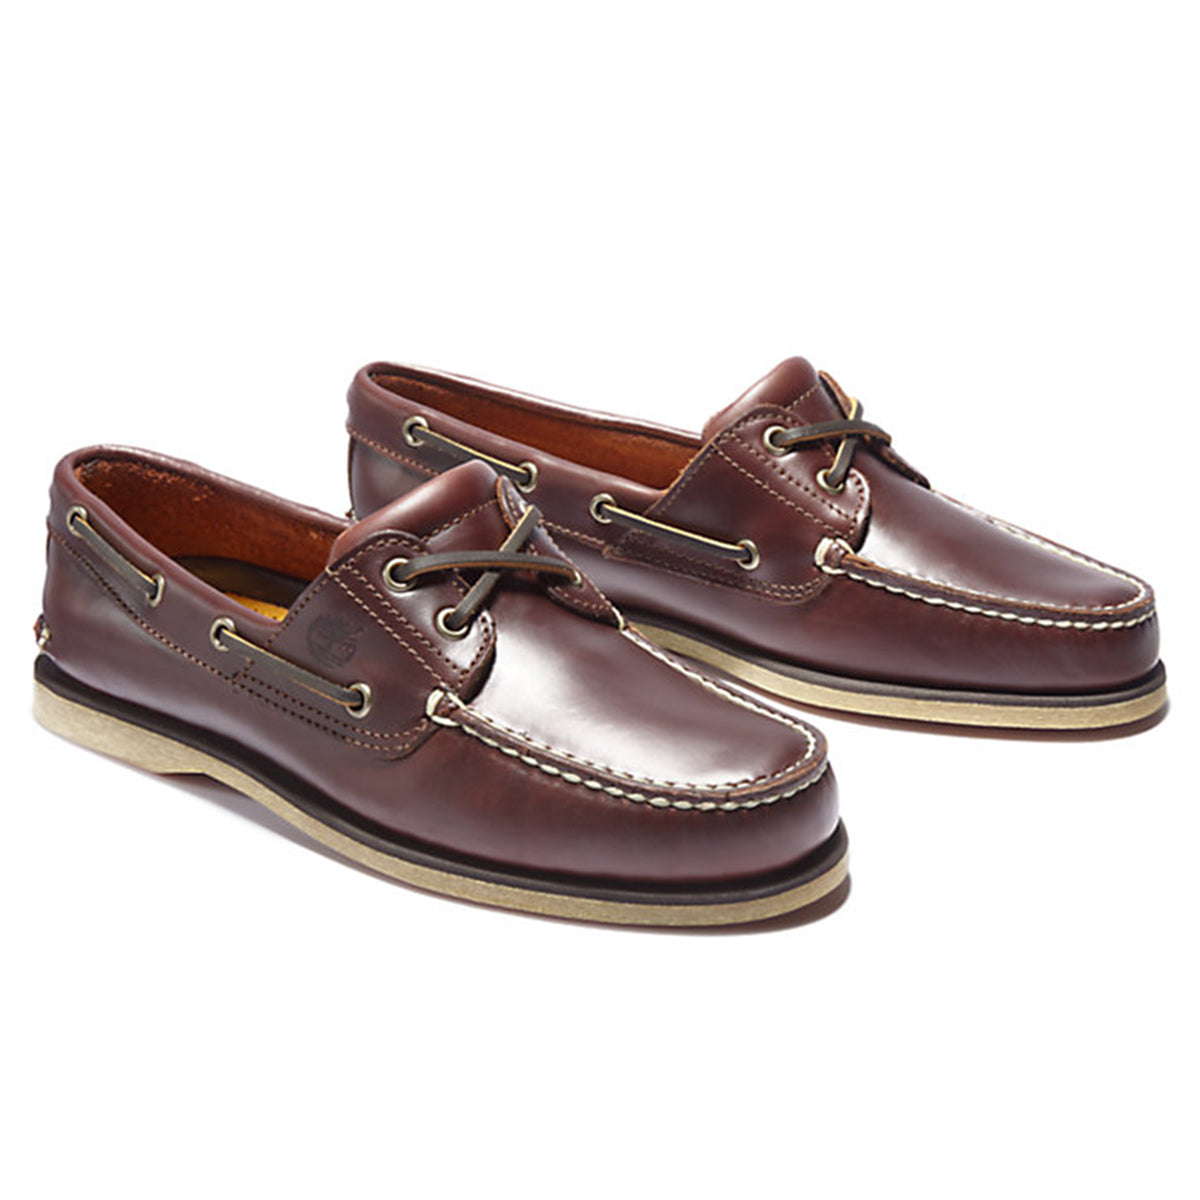 Timberland Classic Boat Shoe - 25077 Rootbeer